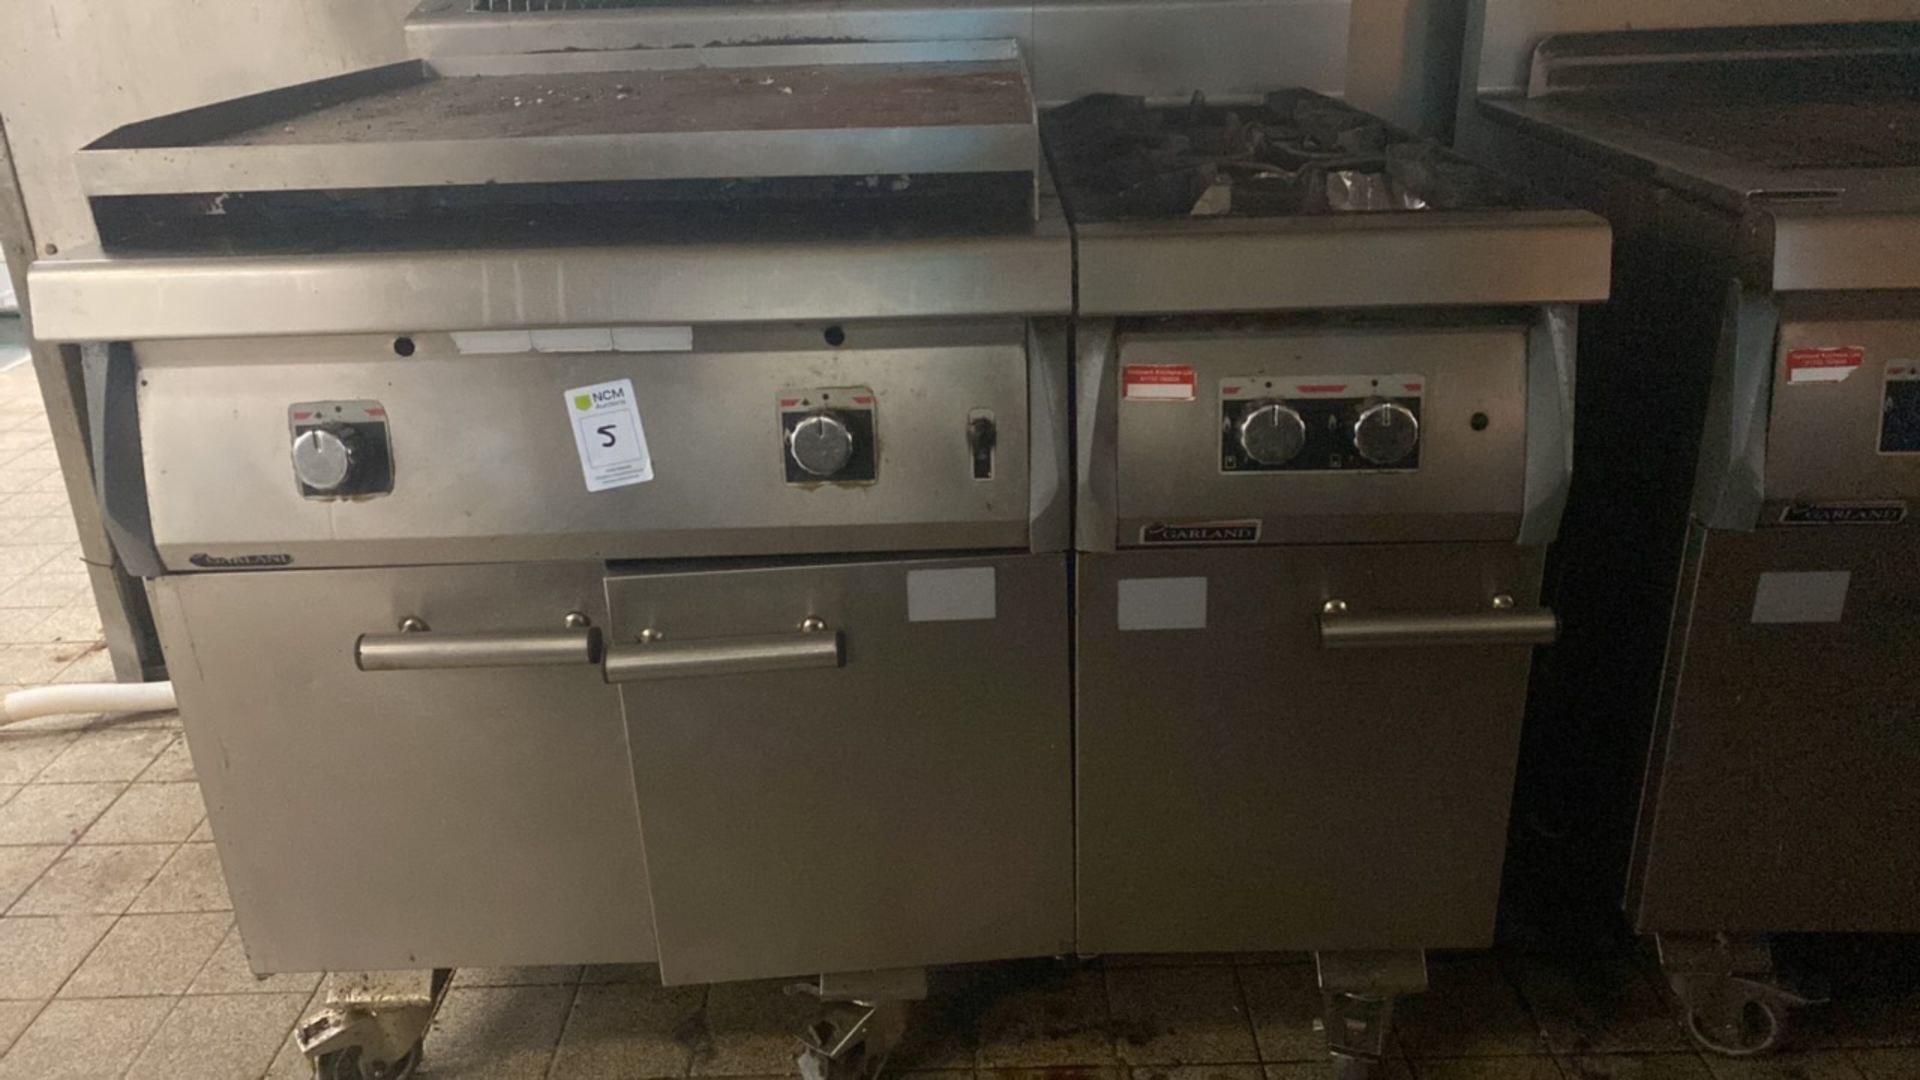 Garland Solid Top Oven & Garland Two Burner